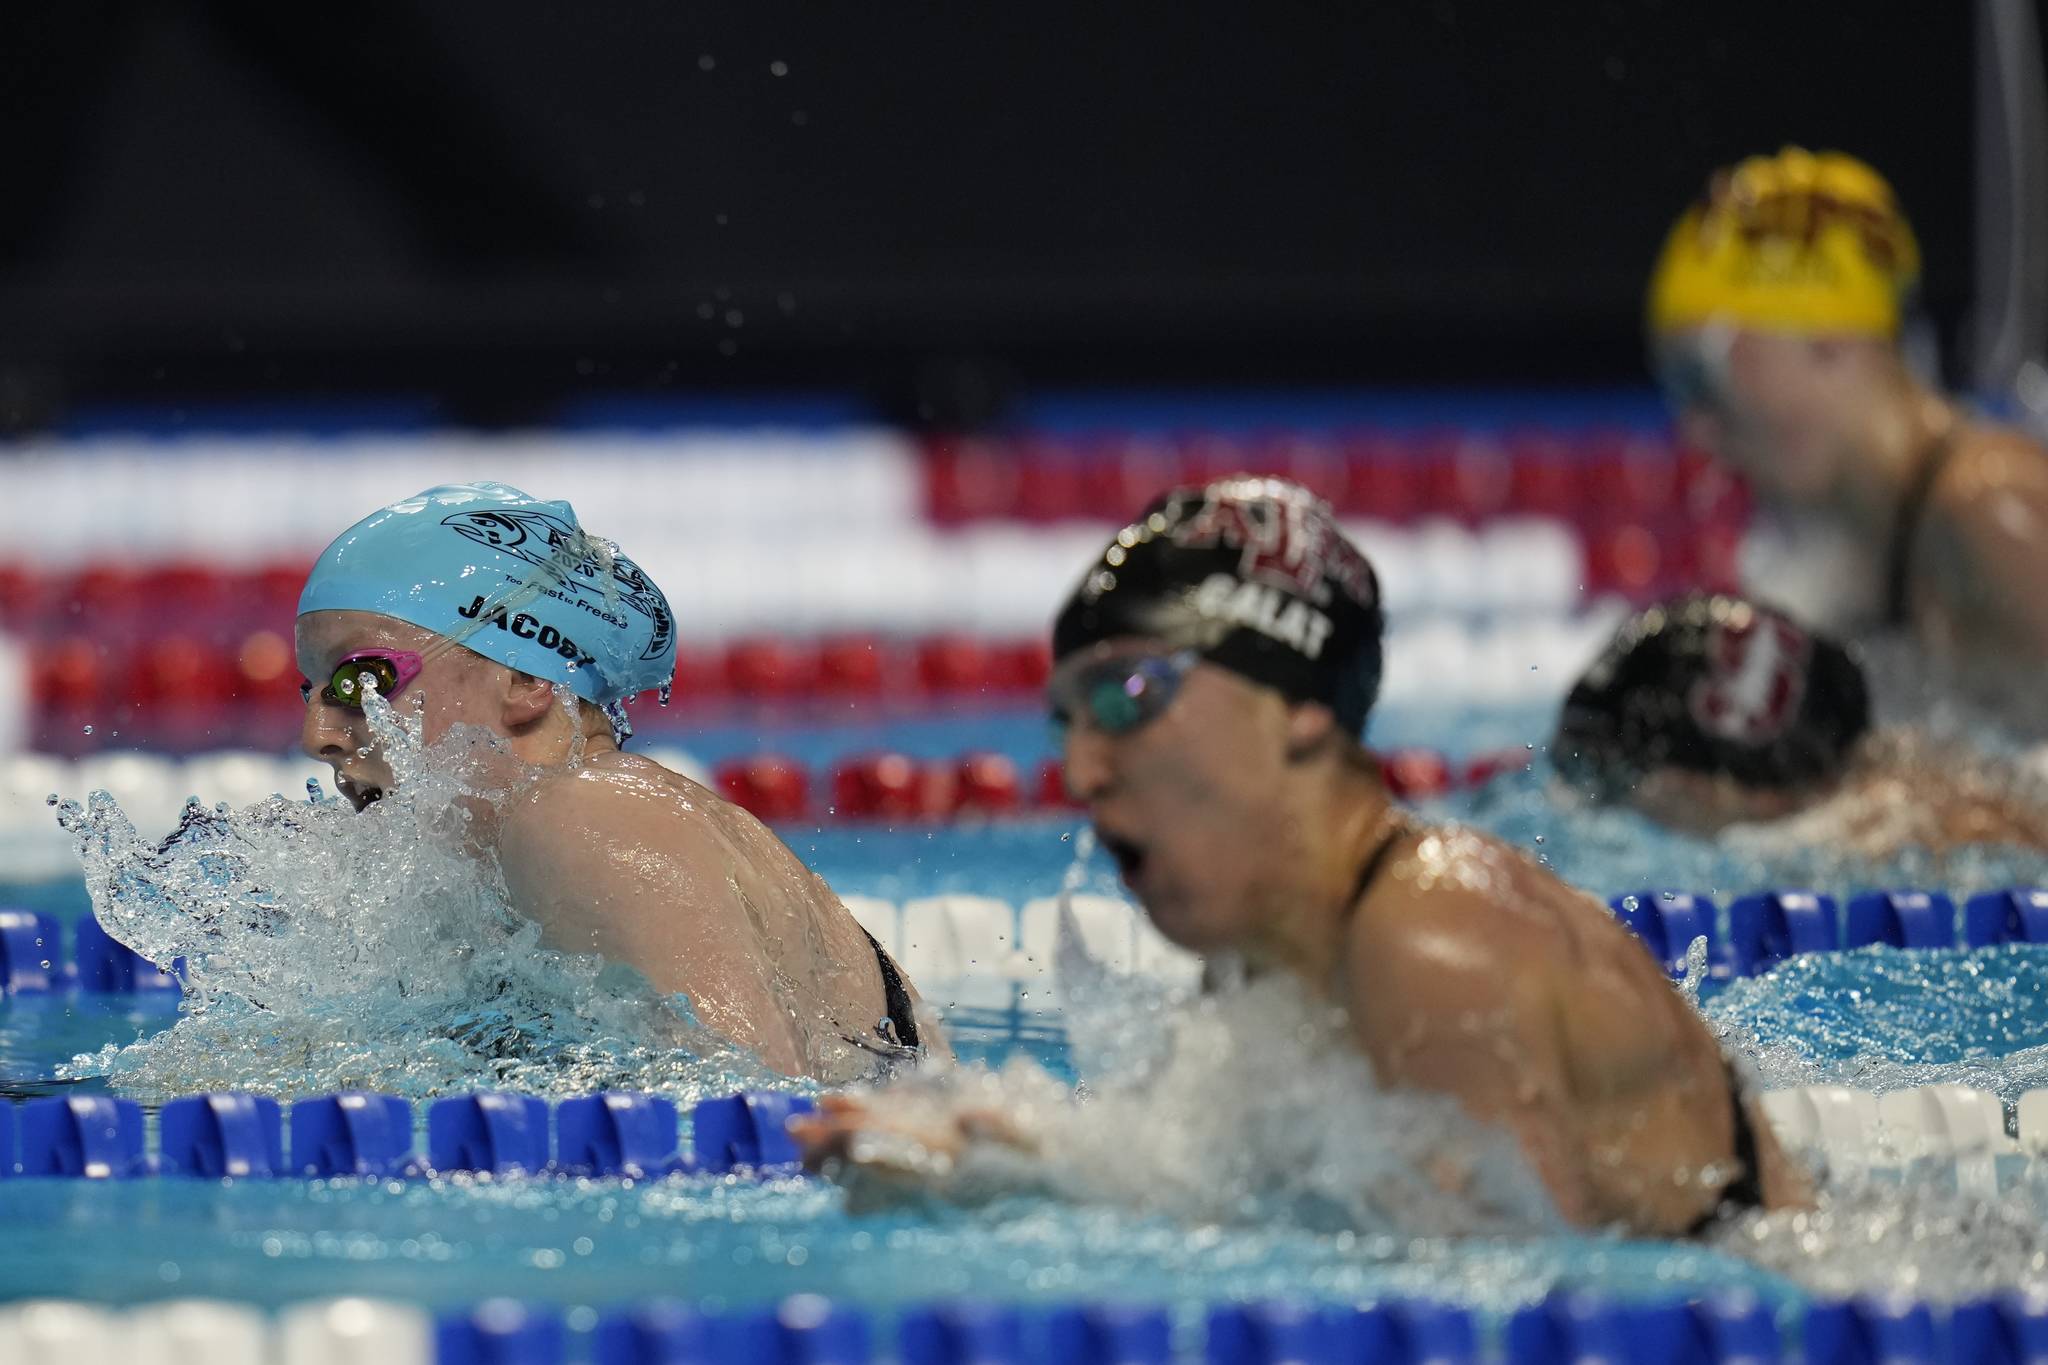 Lydia Jacoby participates in the Women’s 100 Breaststroke during wave 2 of the U.S. Olympic Swim Trials on Monday, June 14, 2021, in Omaha, Neb. On Tuesday Jacoby came in second to former Olympic gold medalist Lilly King in the finals, likely earning herself a spot on the Olympic team. (AP Photo/Jeff Roberson)